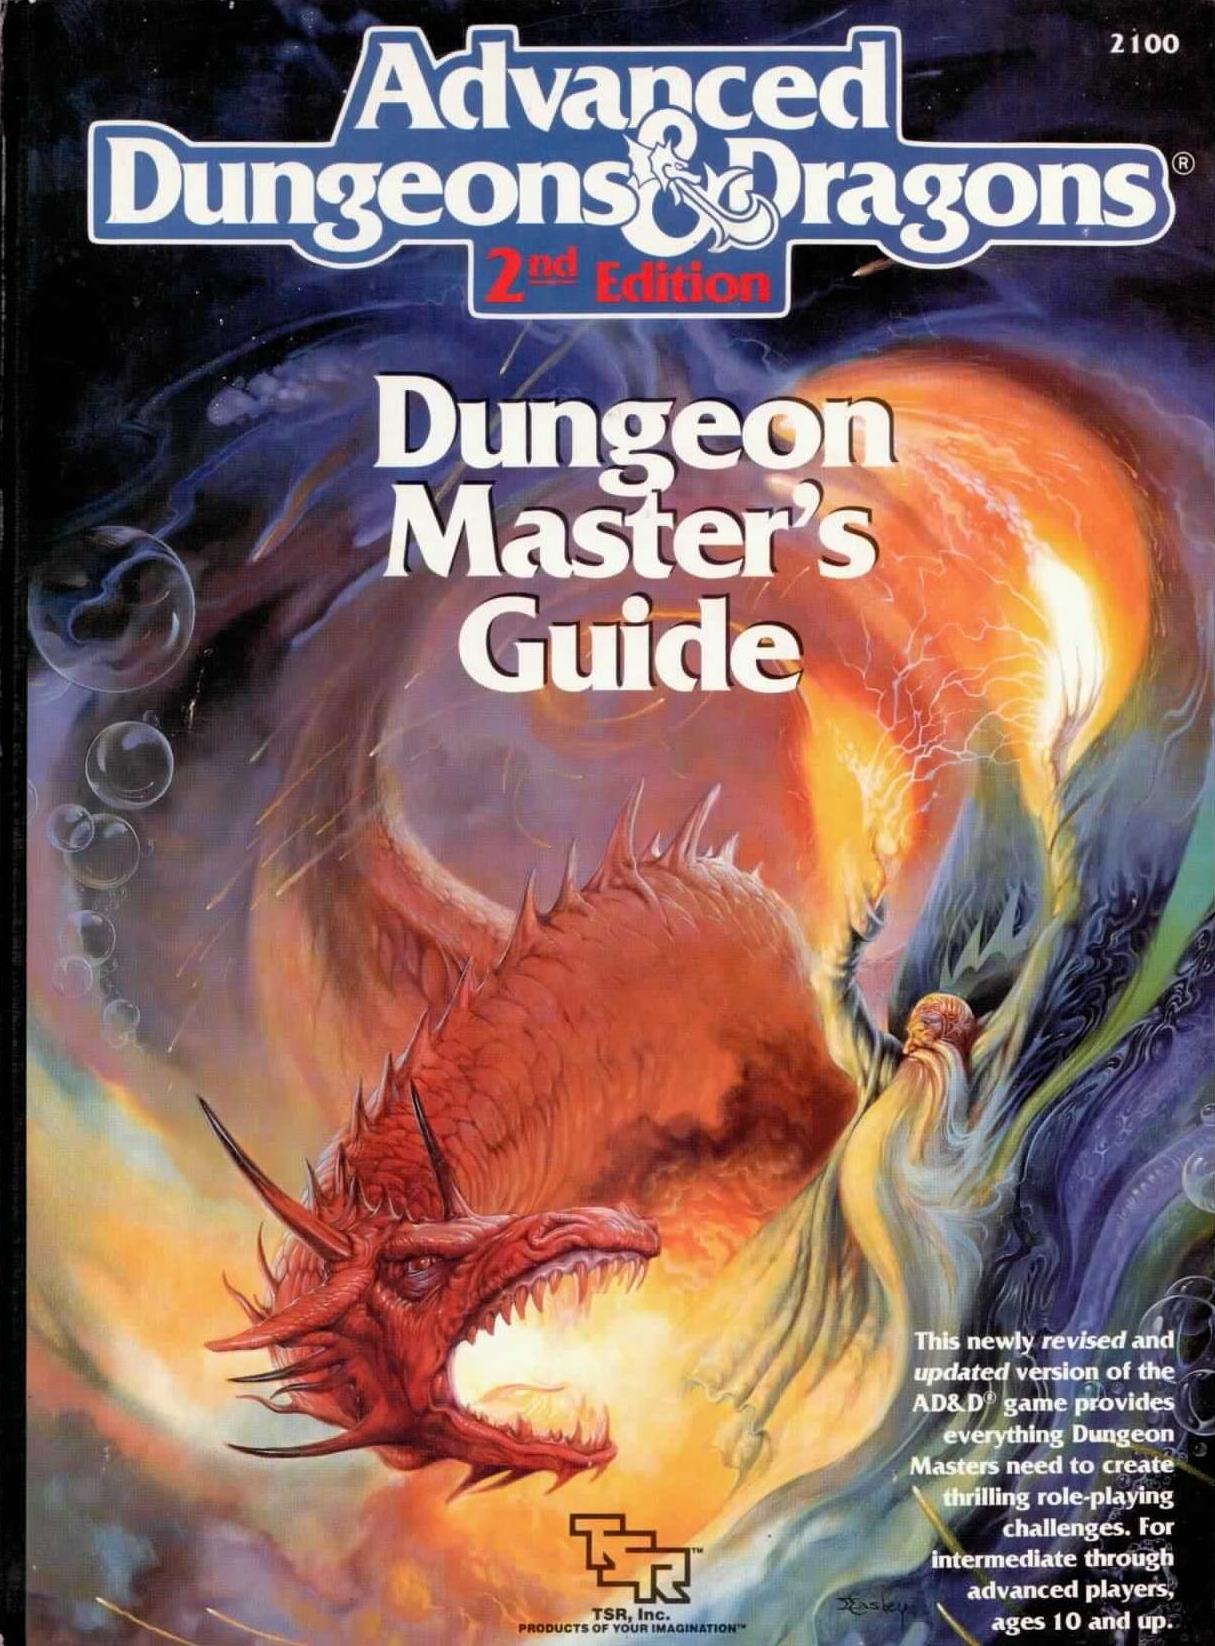 Advanced Dungeons & Dragons, 2nd Edition logo and handbooks Fonts In Use